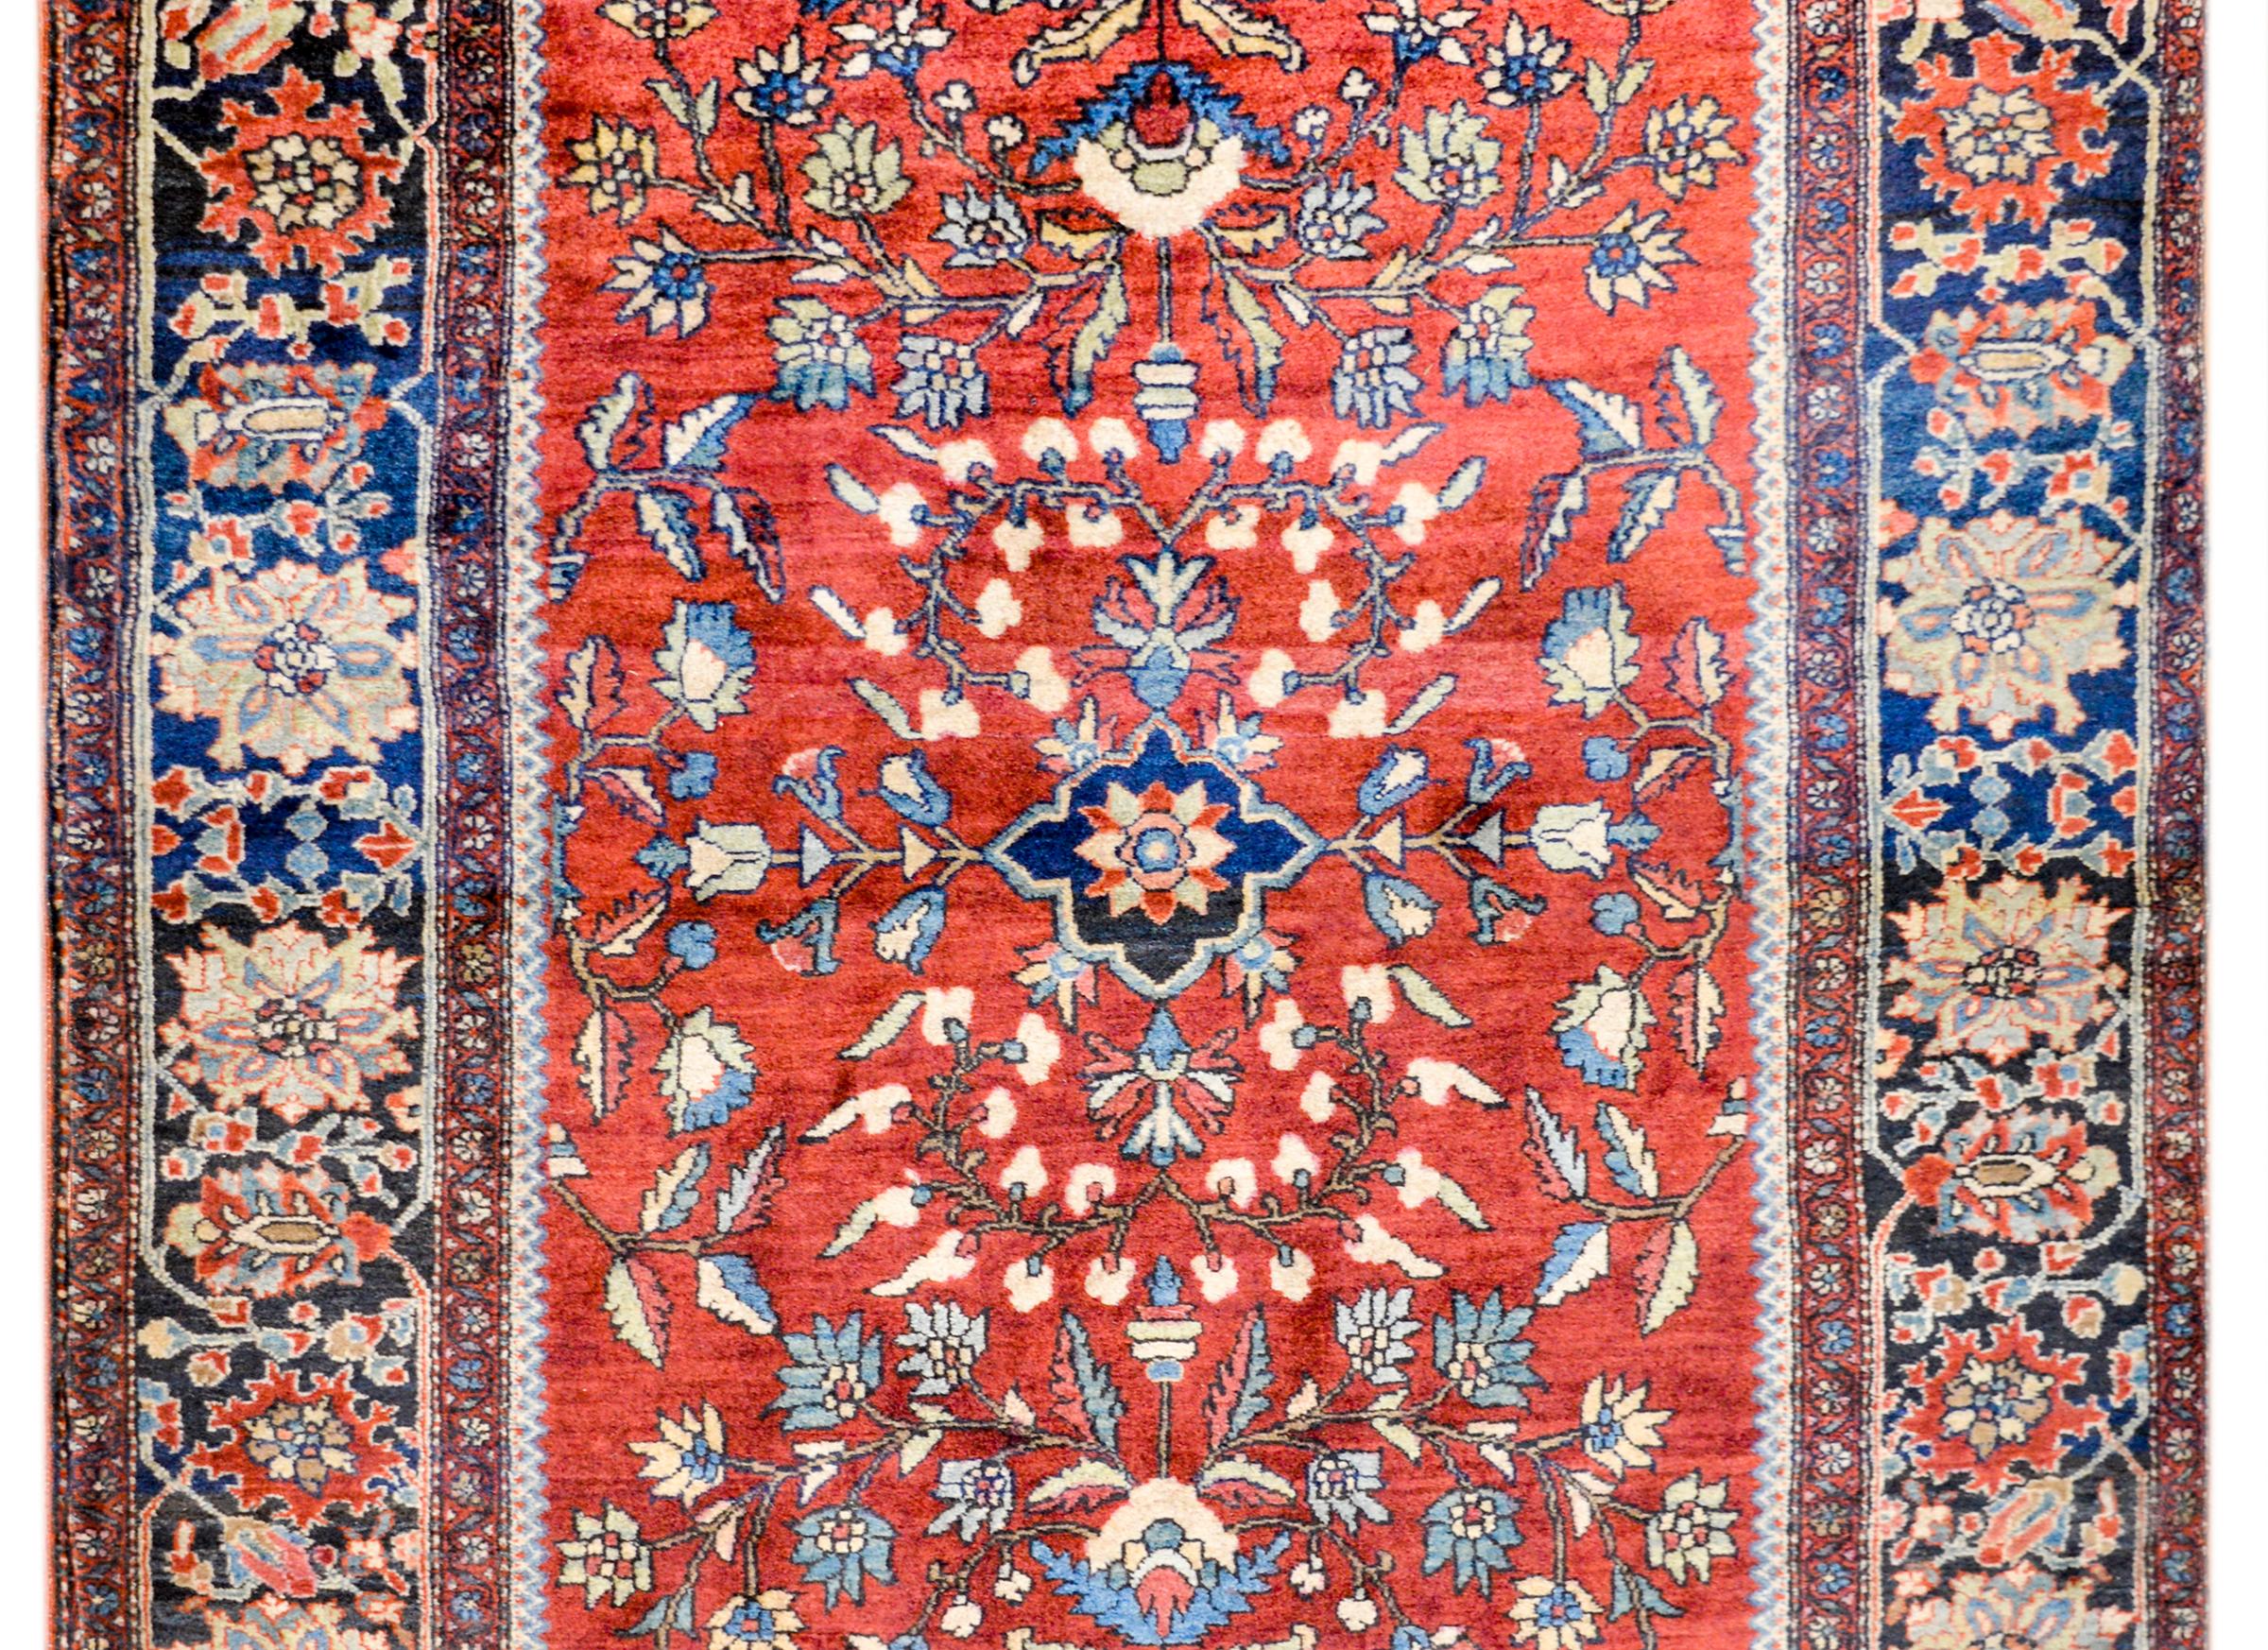 A beautiful early 20th century Persian Sarouk Farahan rug with a mirrored floral and vine pattern woven in light and dark indigo, green, and cream colored wool, in a bright crimson background. The border is elaborate with a large-scale floral and